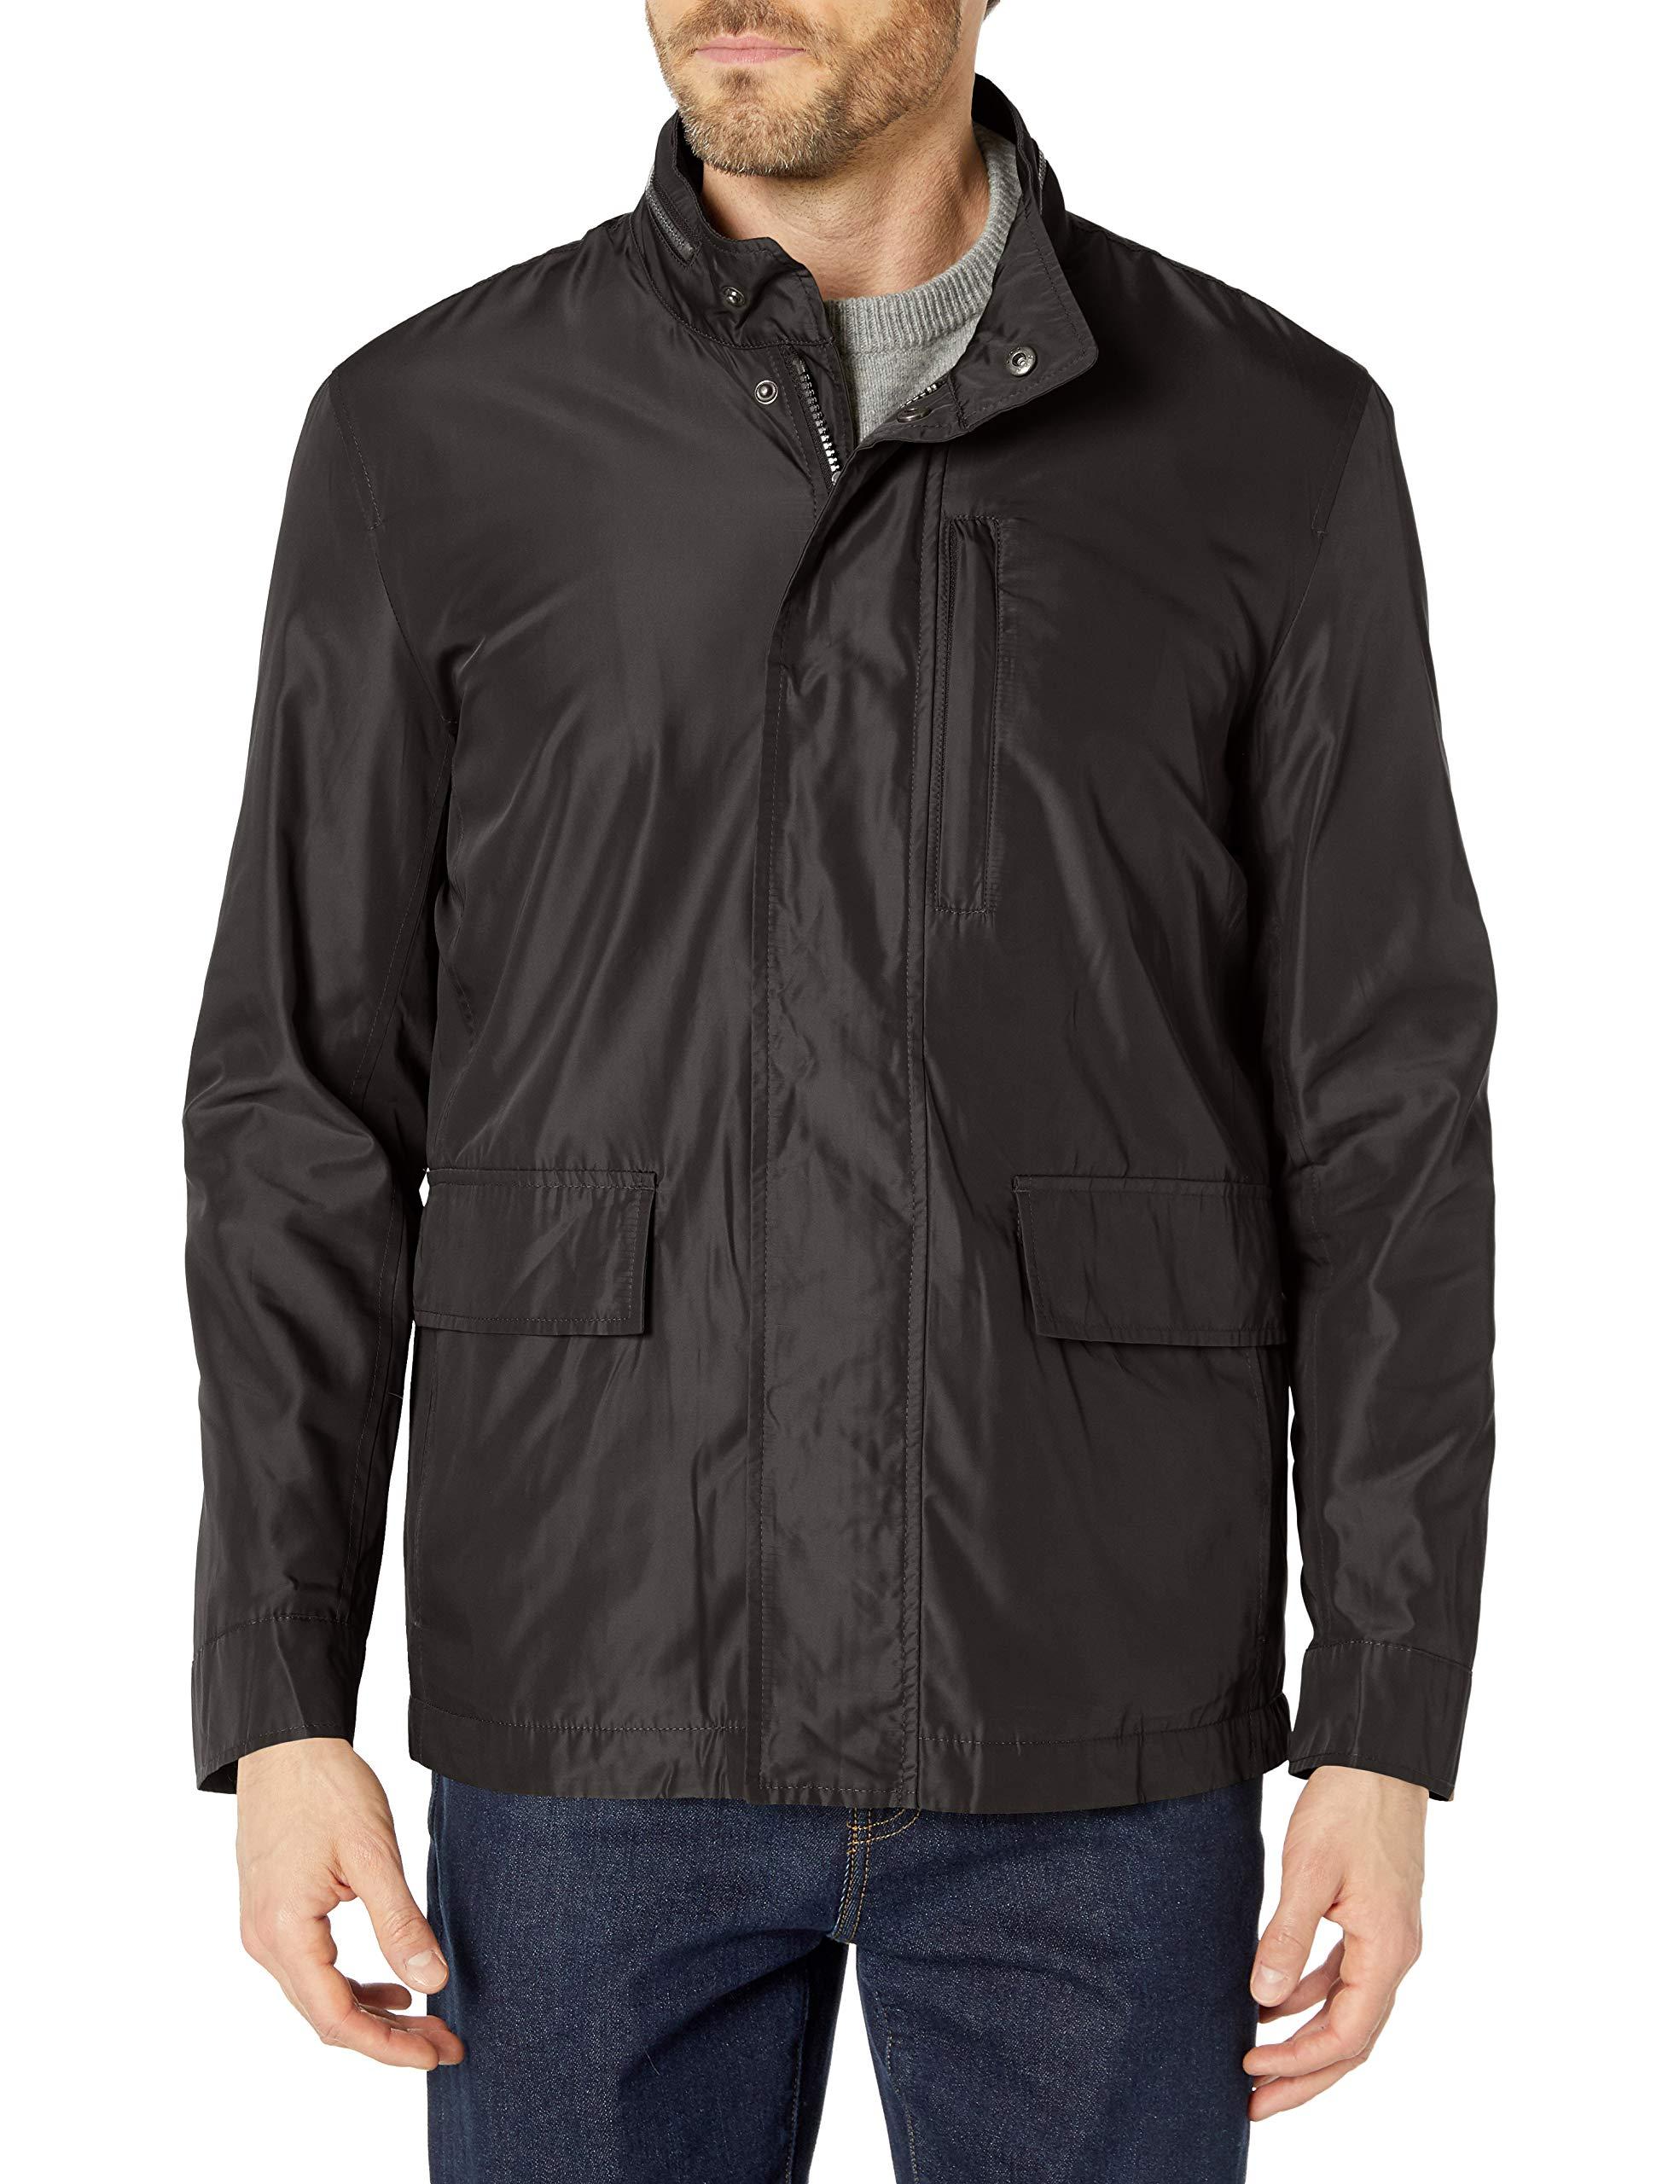 Cole Haan Packable Rain Jacket in Black for Men - Save 50% - Lyst